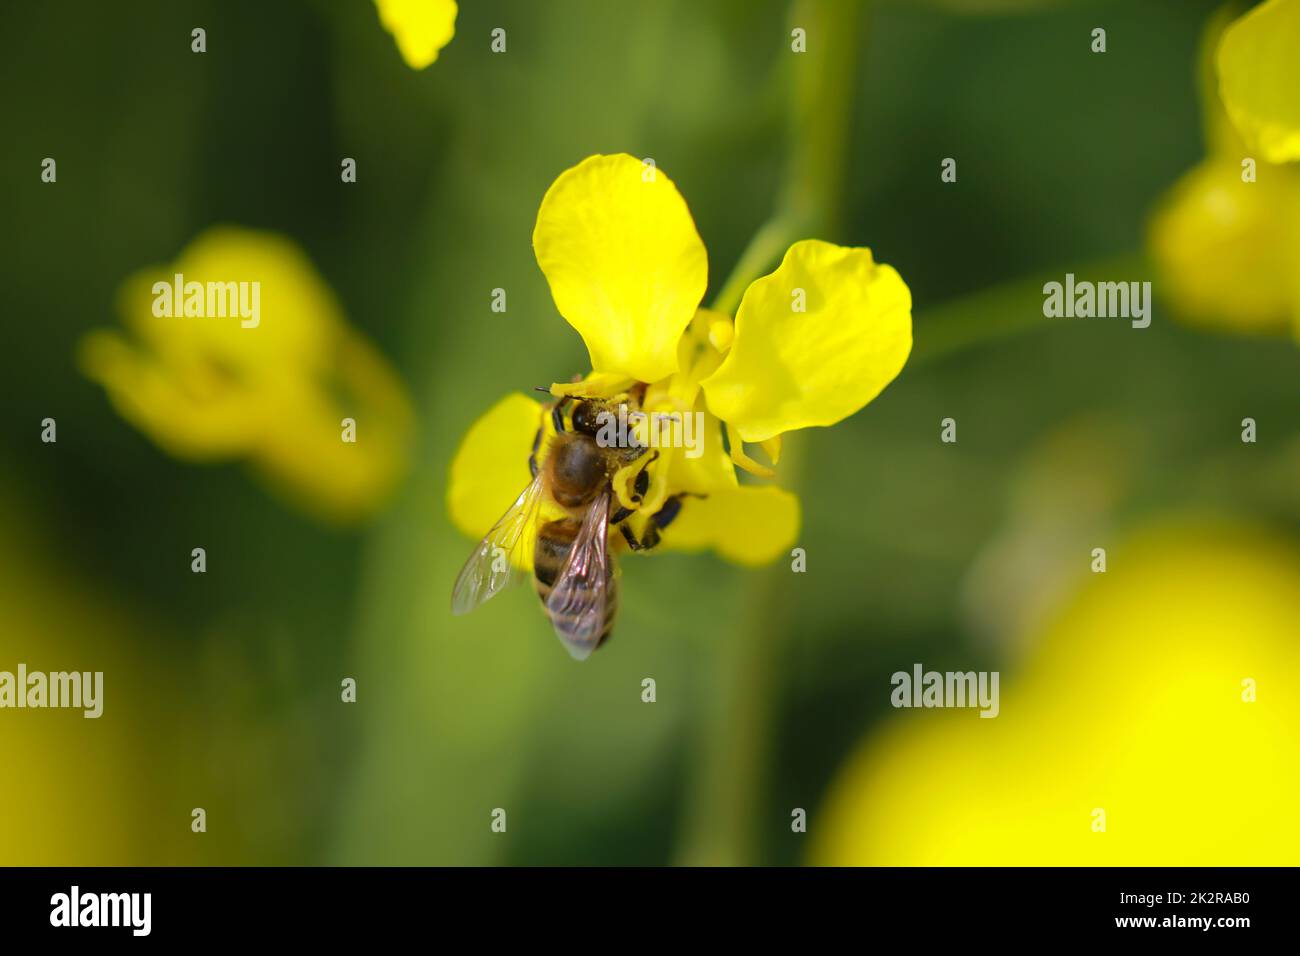 A bee collects pollen on the flower of a canola plant. Stock Photo